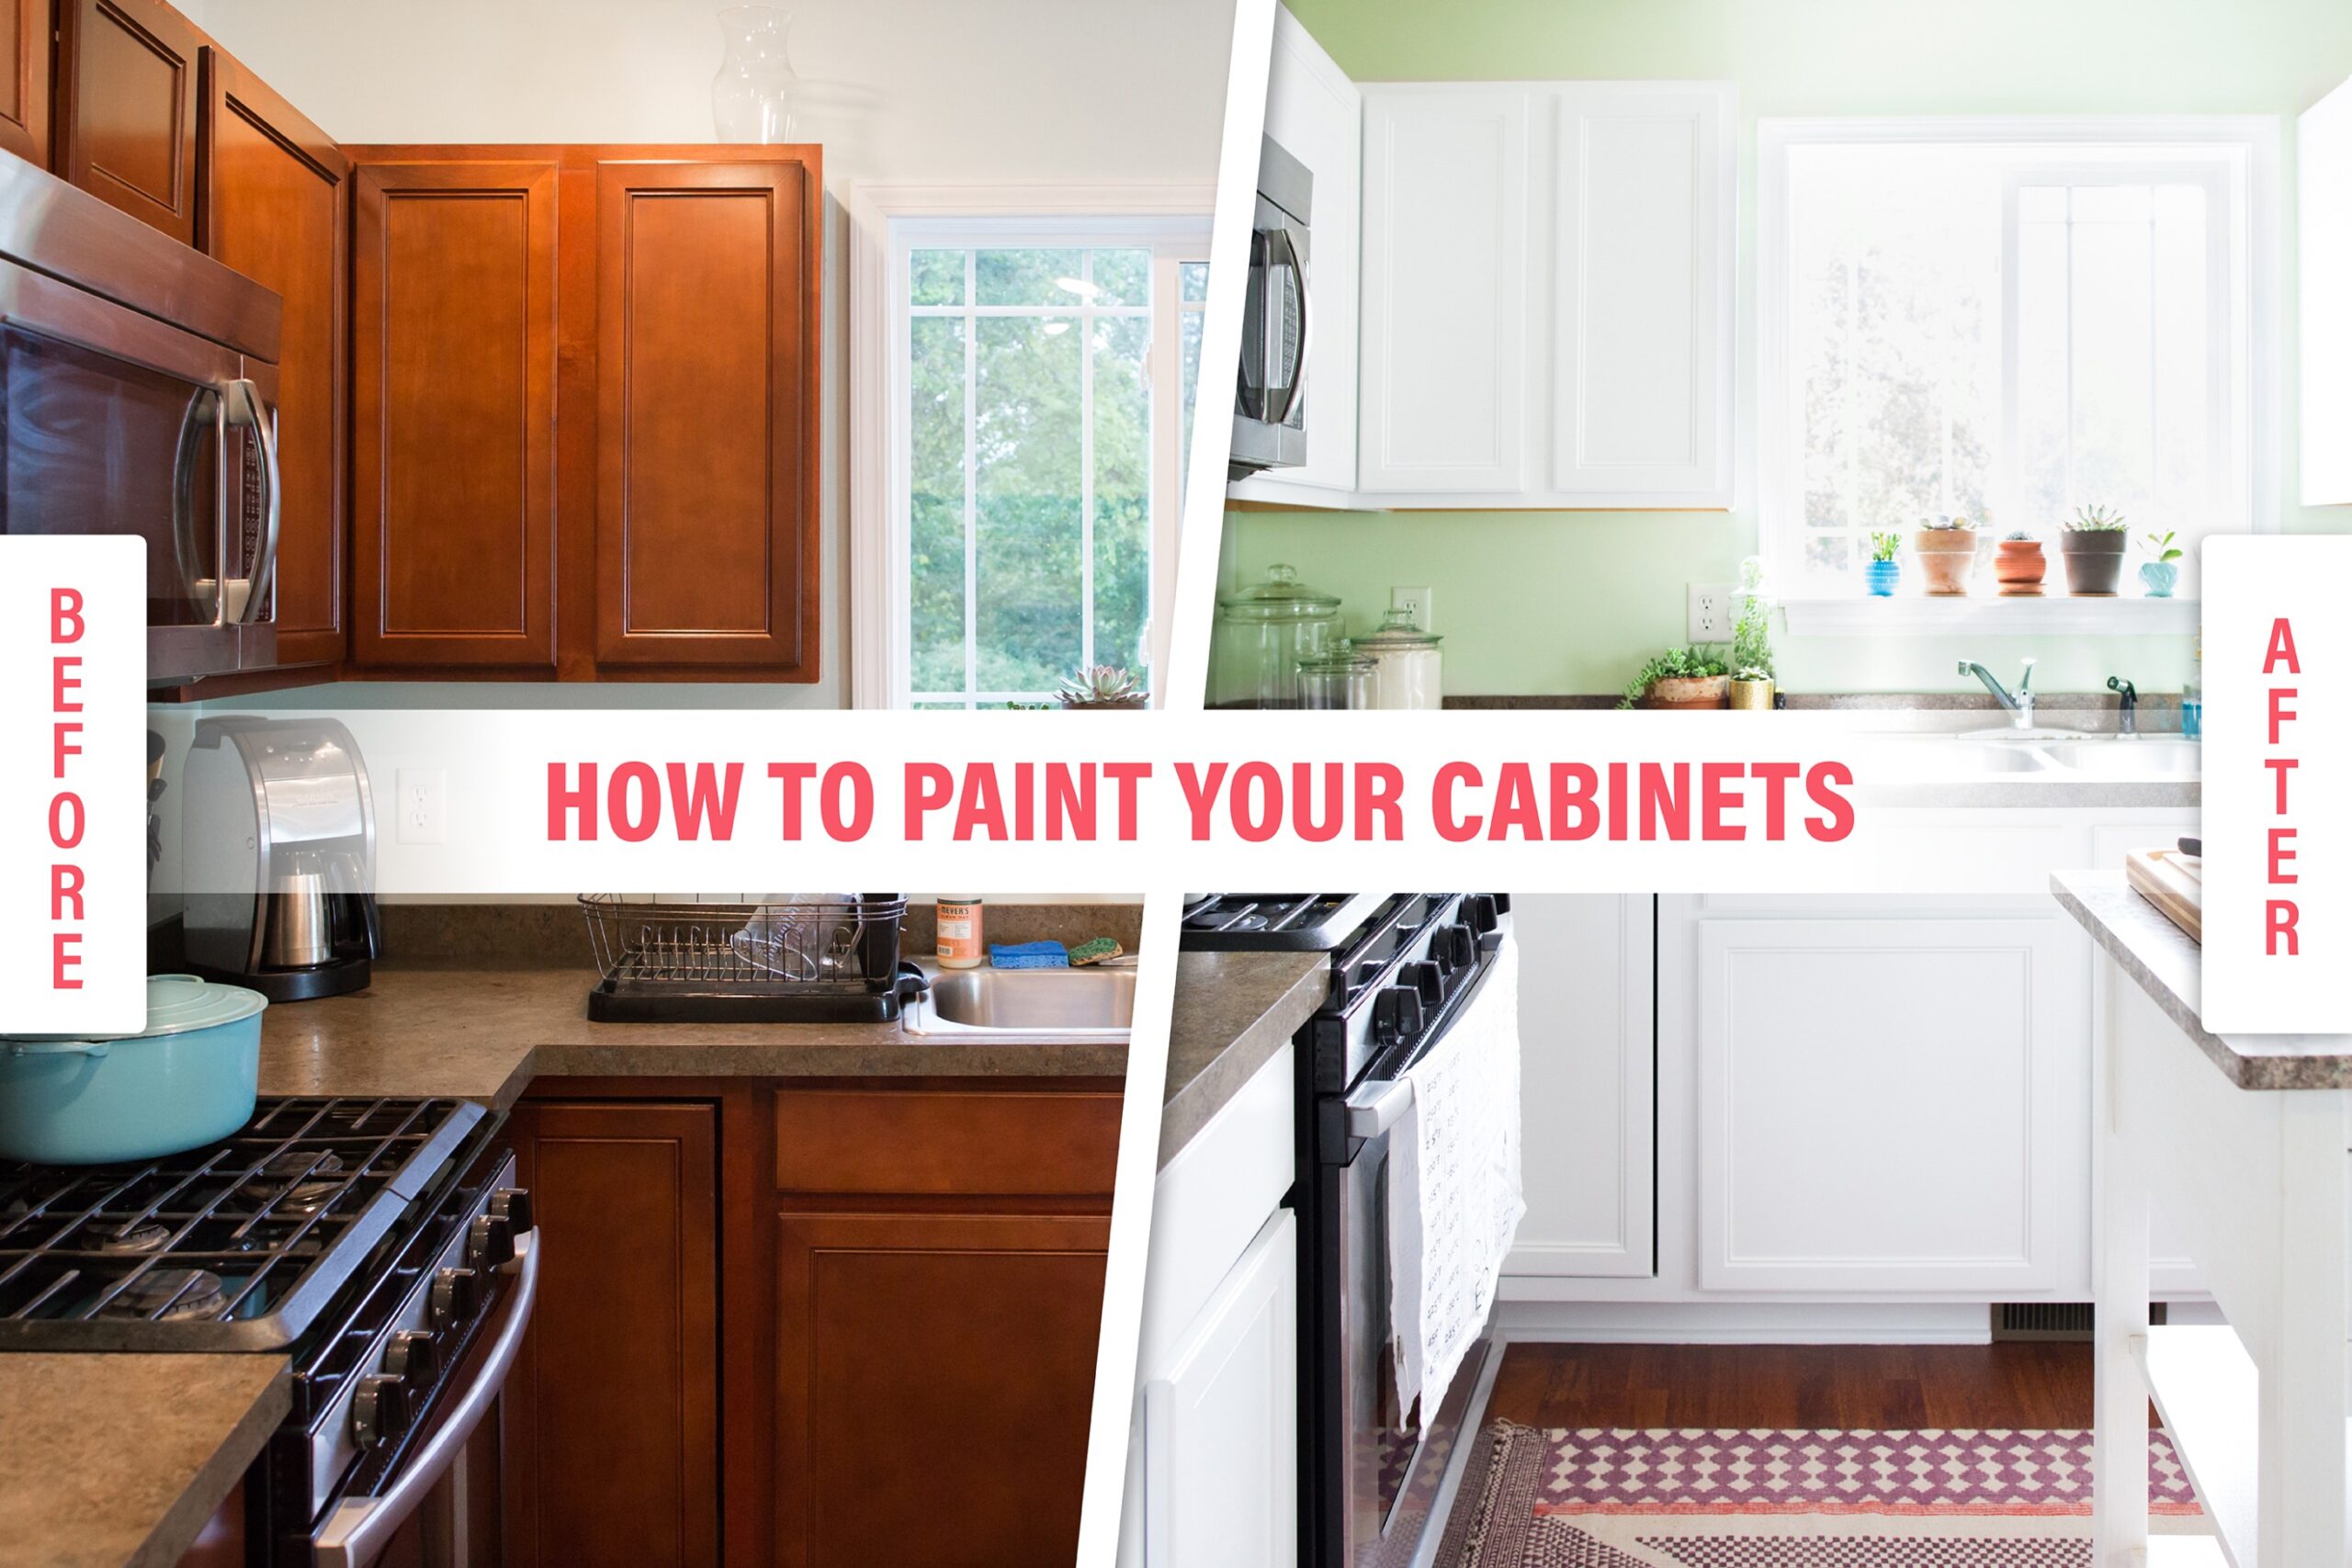 How To Paint Wood Kitchen Cabinets with White Paint  Kitchn - white paint cabinets